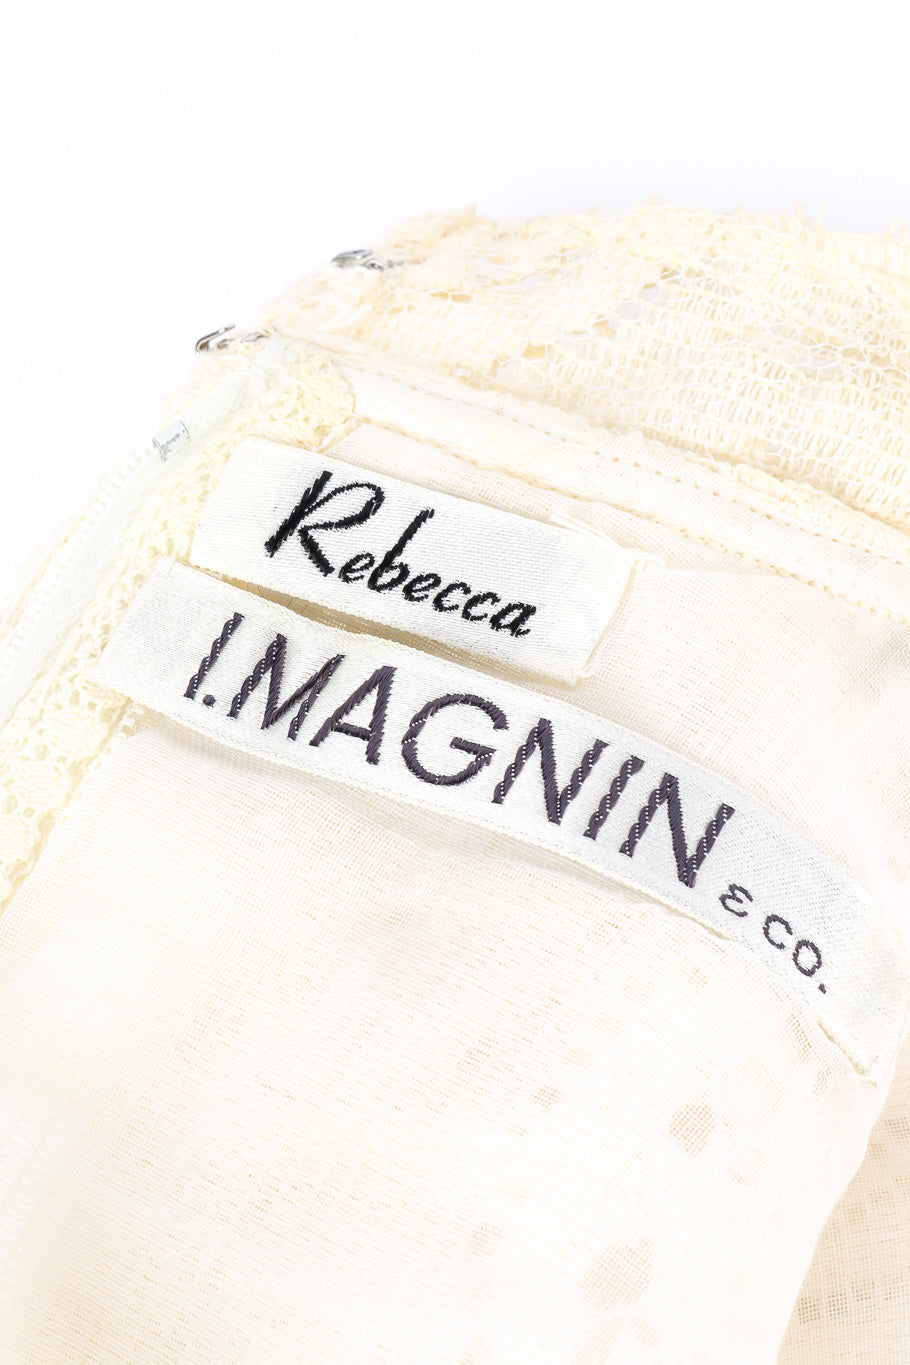 Rebecca for I. Magnin & Co. embroidered tunic and pants on mannequin @recessla